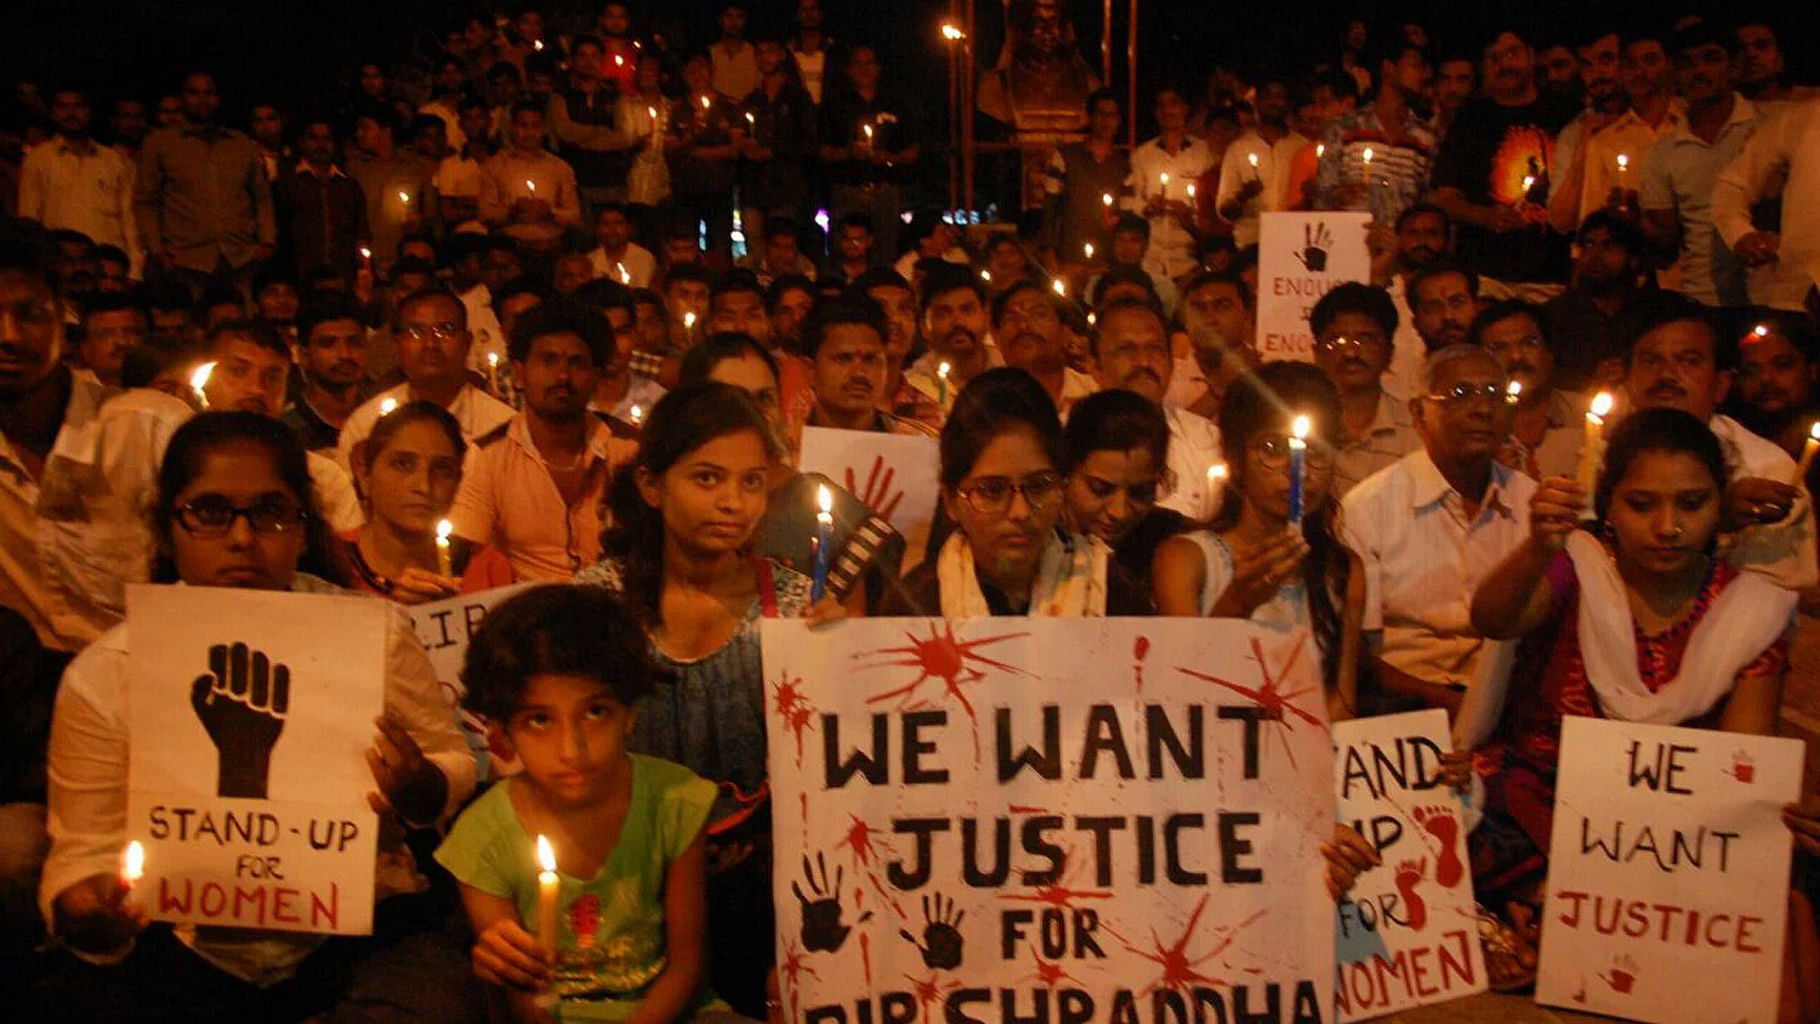 Candle light march by women for justice. Image for representational purpose only.